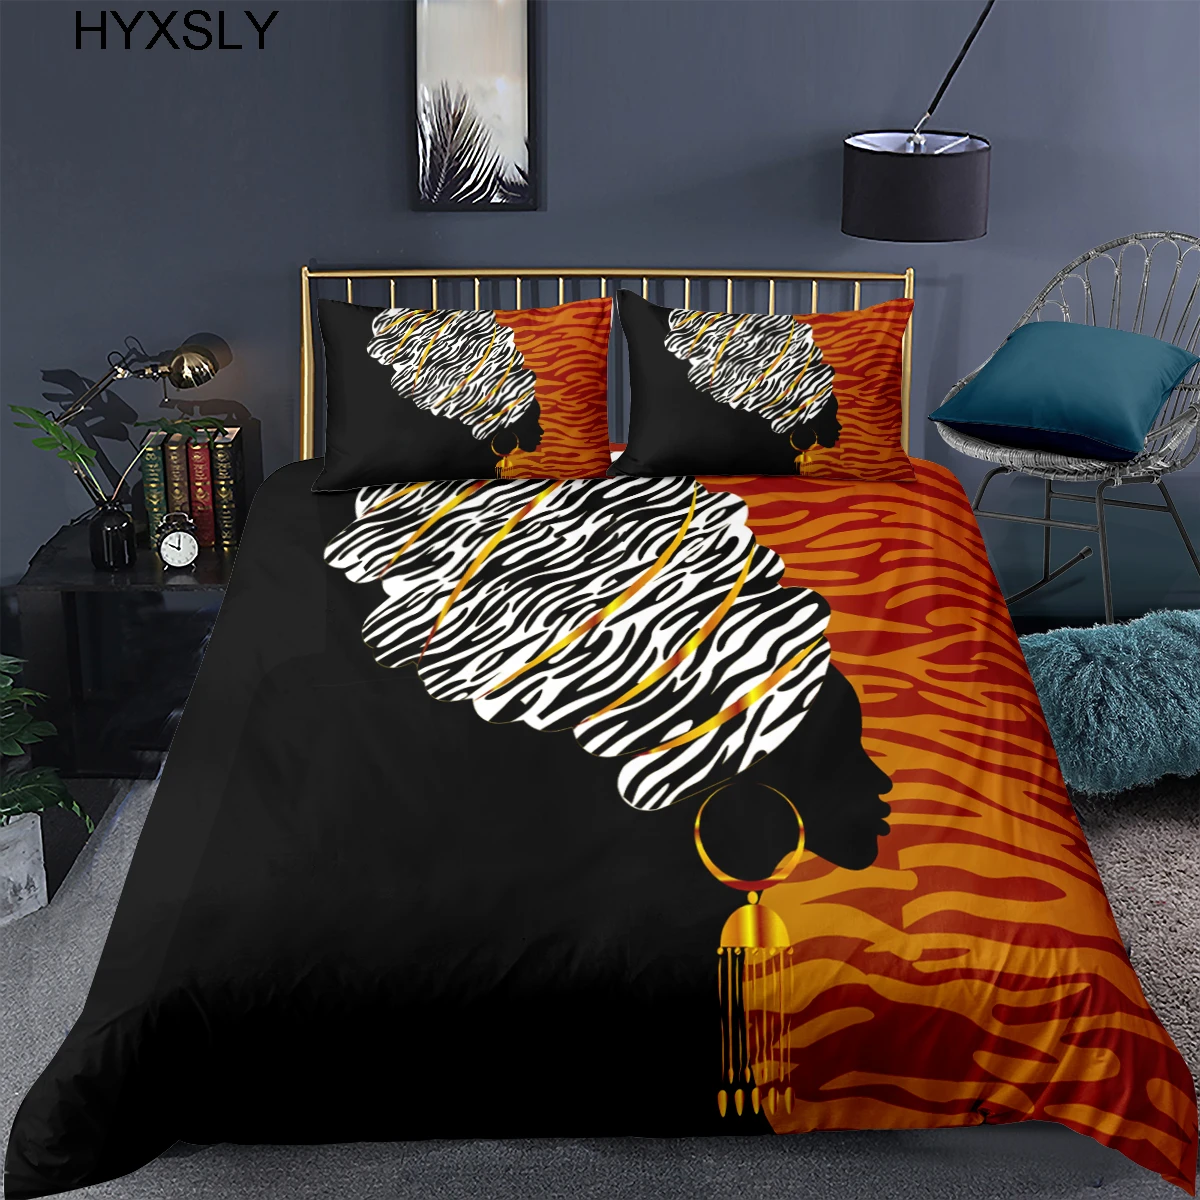 African Woman Bedding Set Design Abstract Duvet Cover Queen King Size Home Textiles Black And White Bedclothes 2/3PCS deep fitted sheets